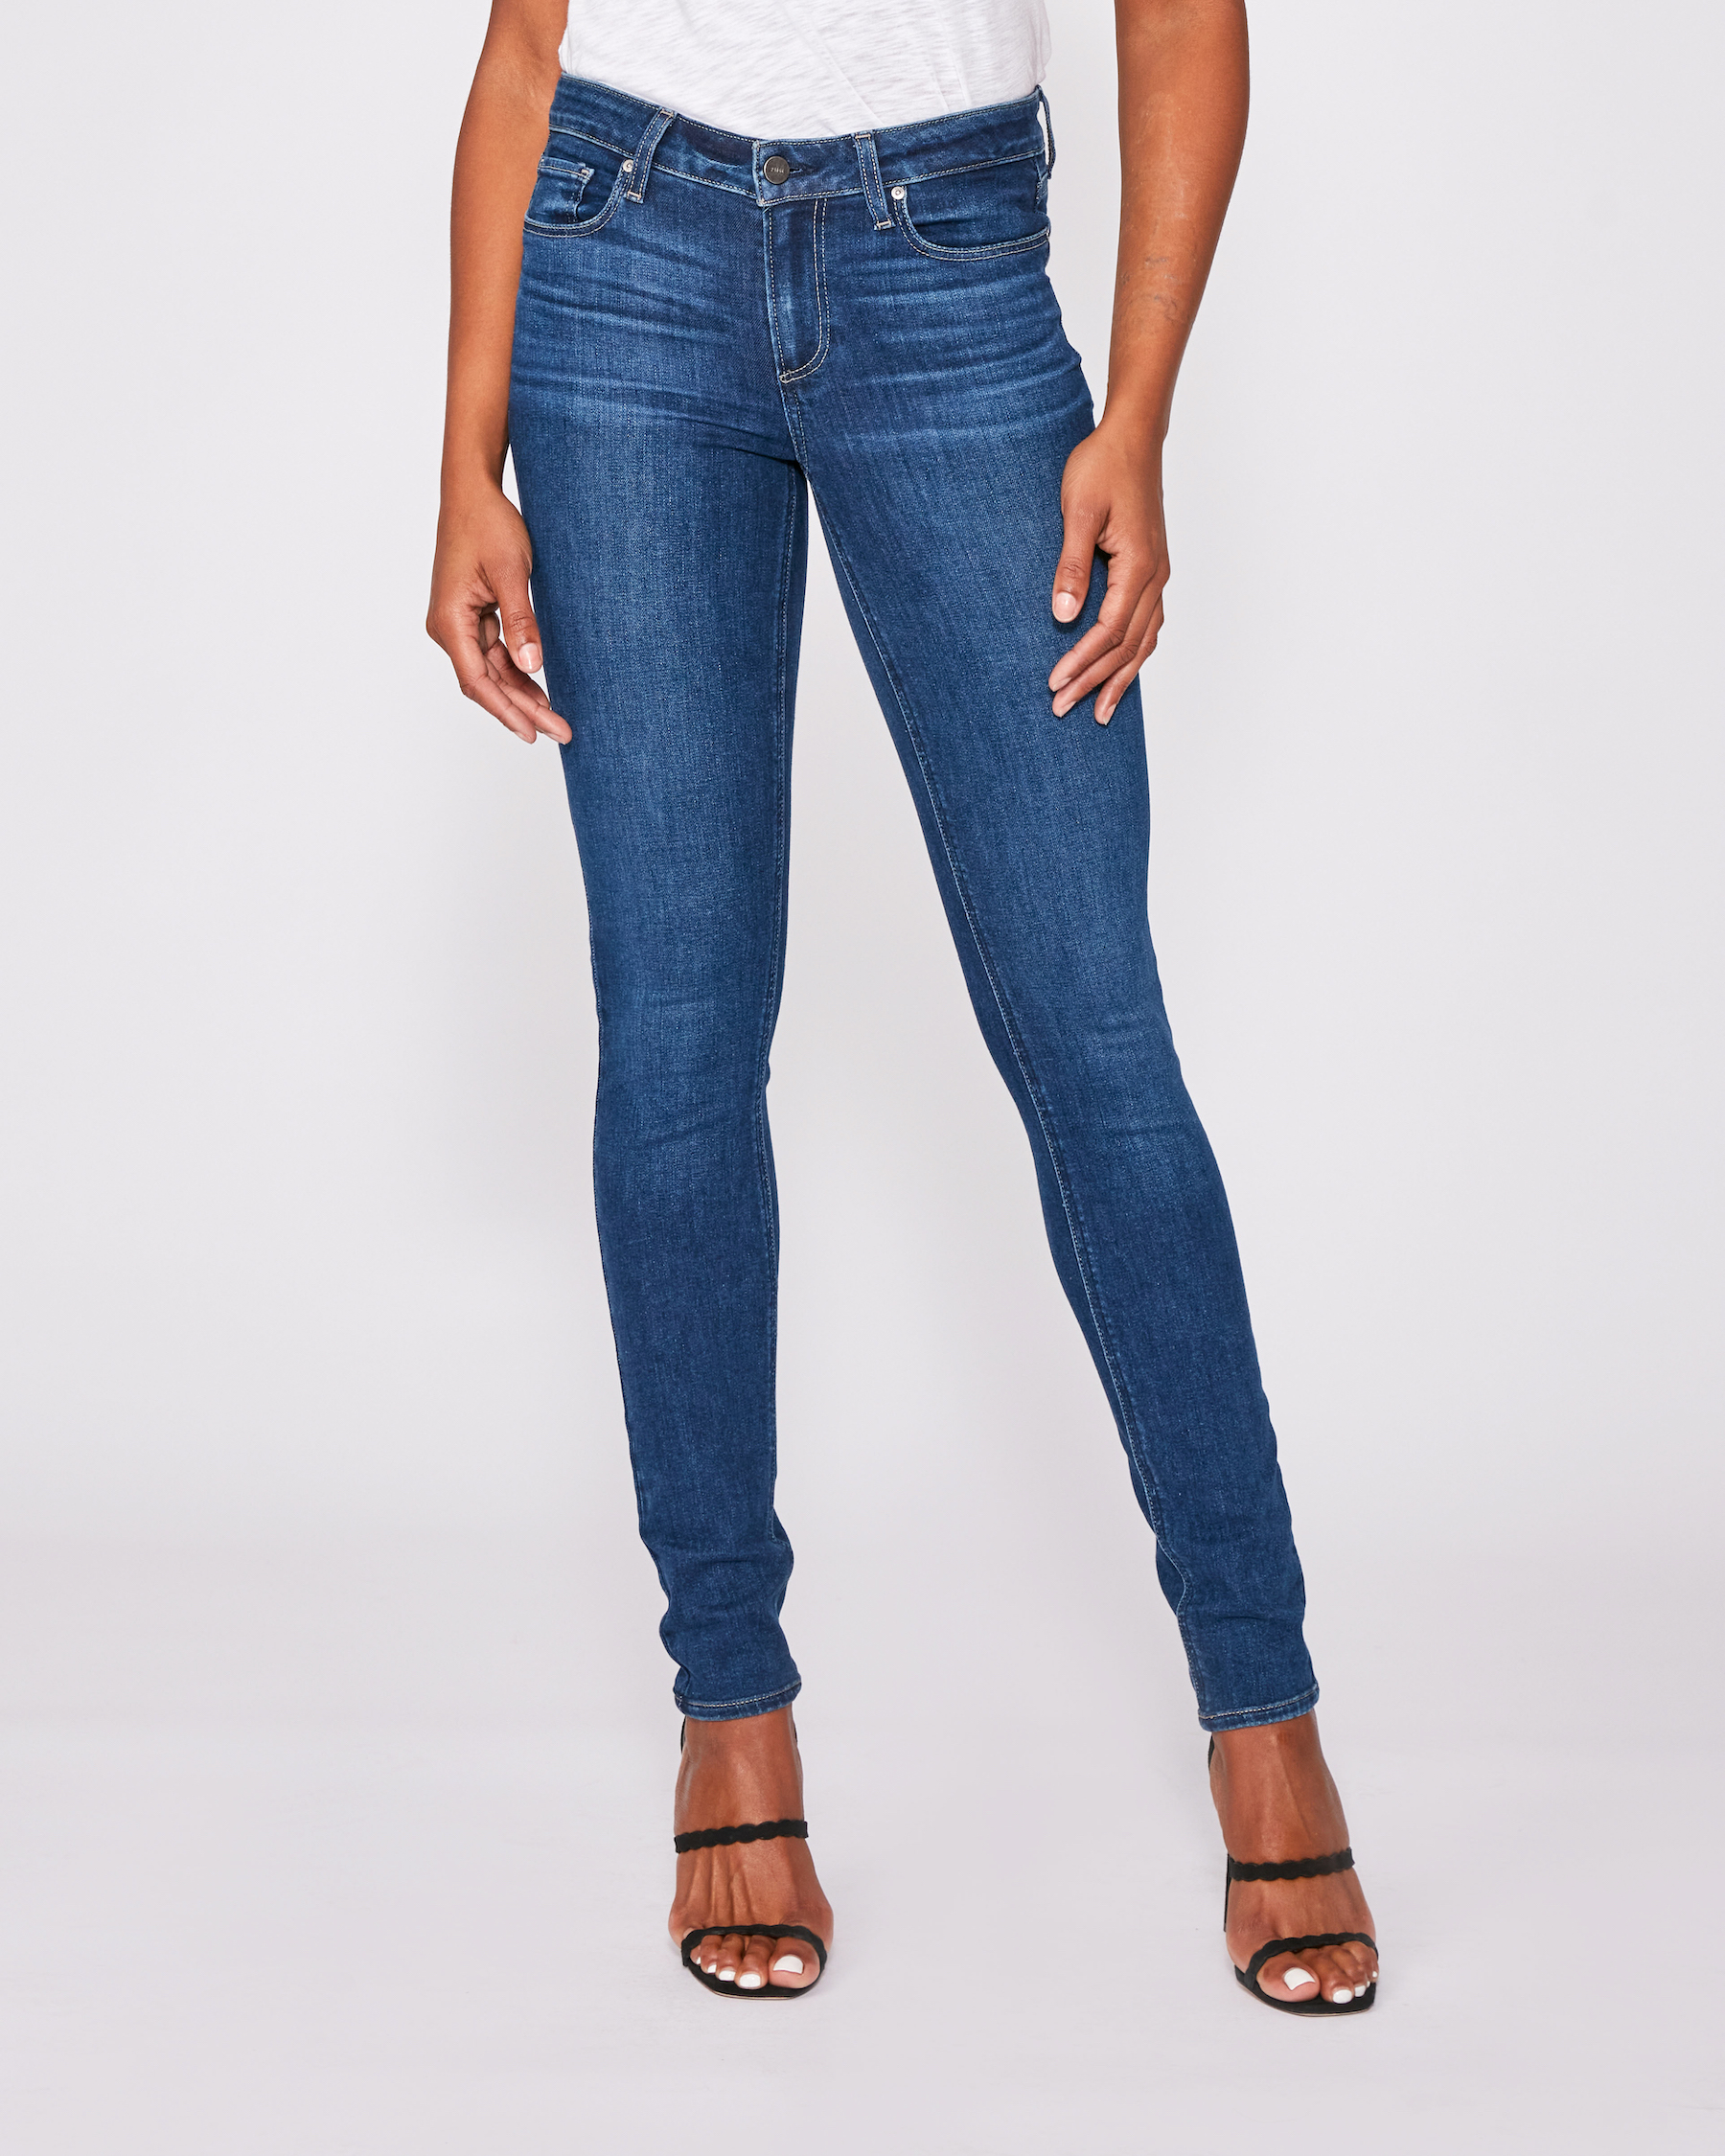 Women's Extra Long Skinny & Flare Jeans | PAIGE®